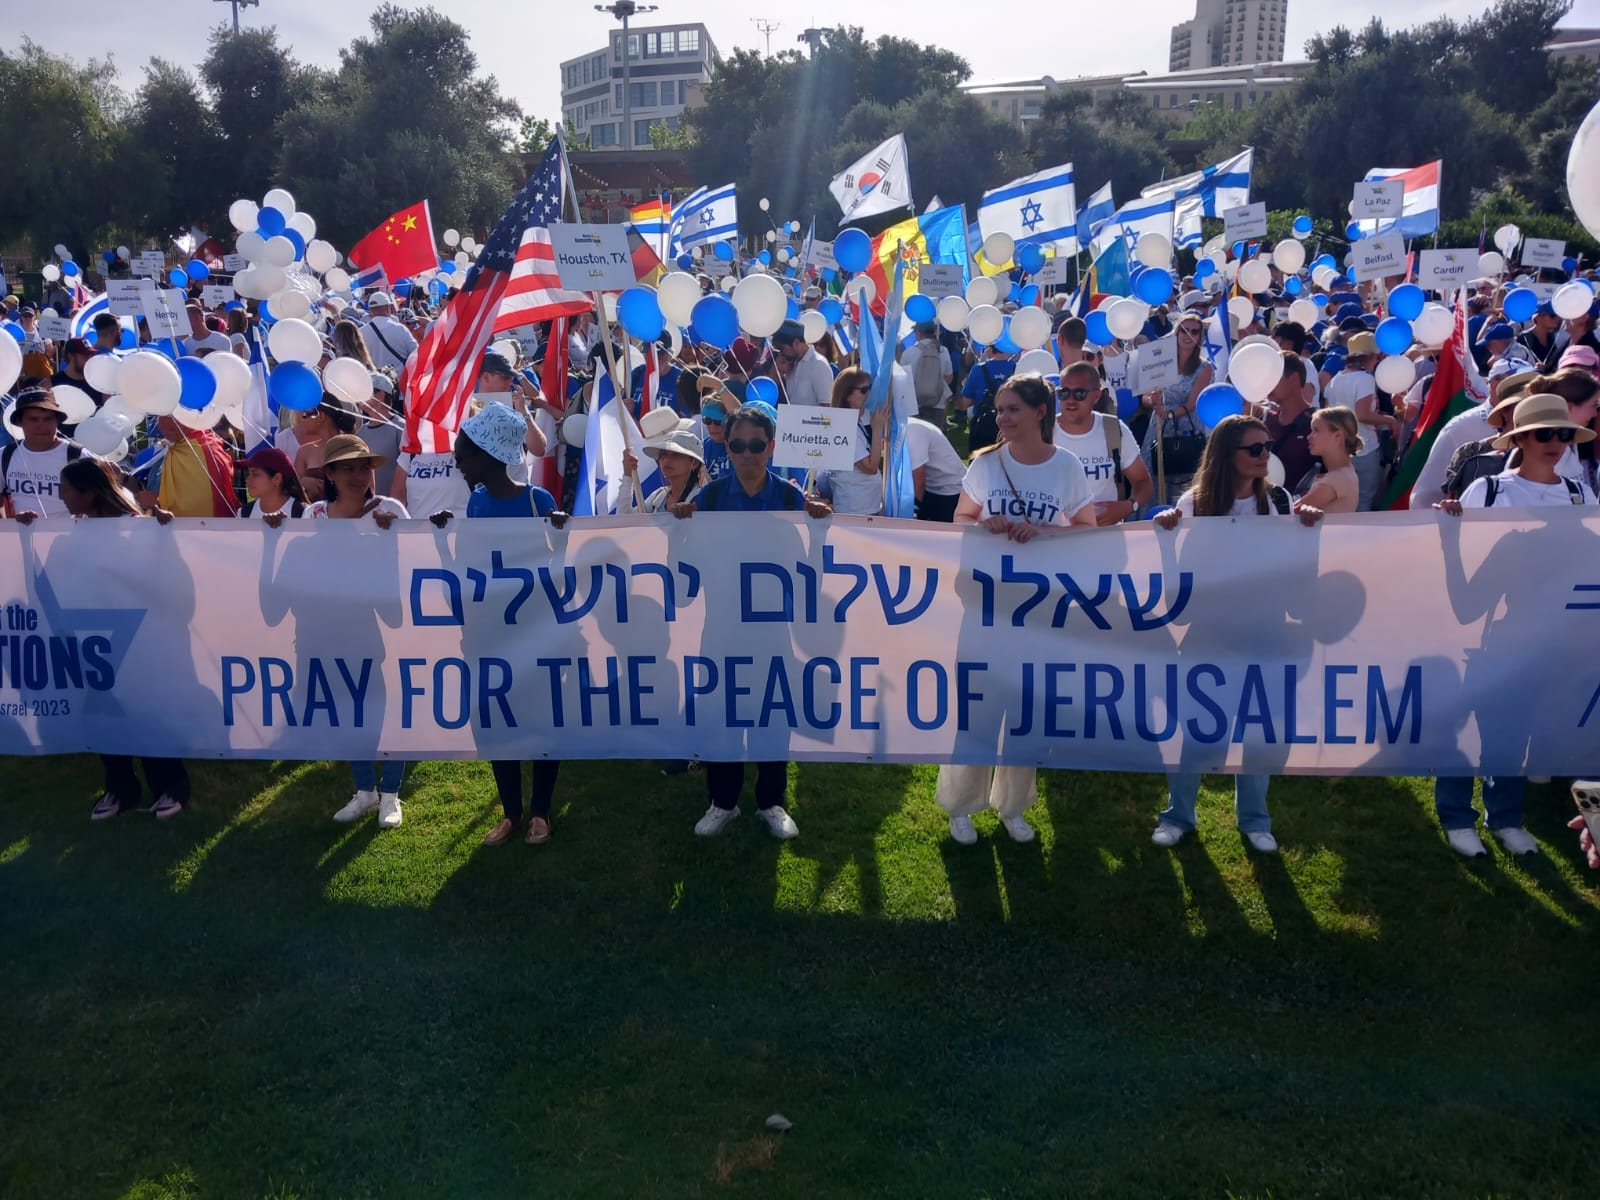 March of Nations: Parade shows Christian love of Jerusalem